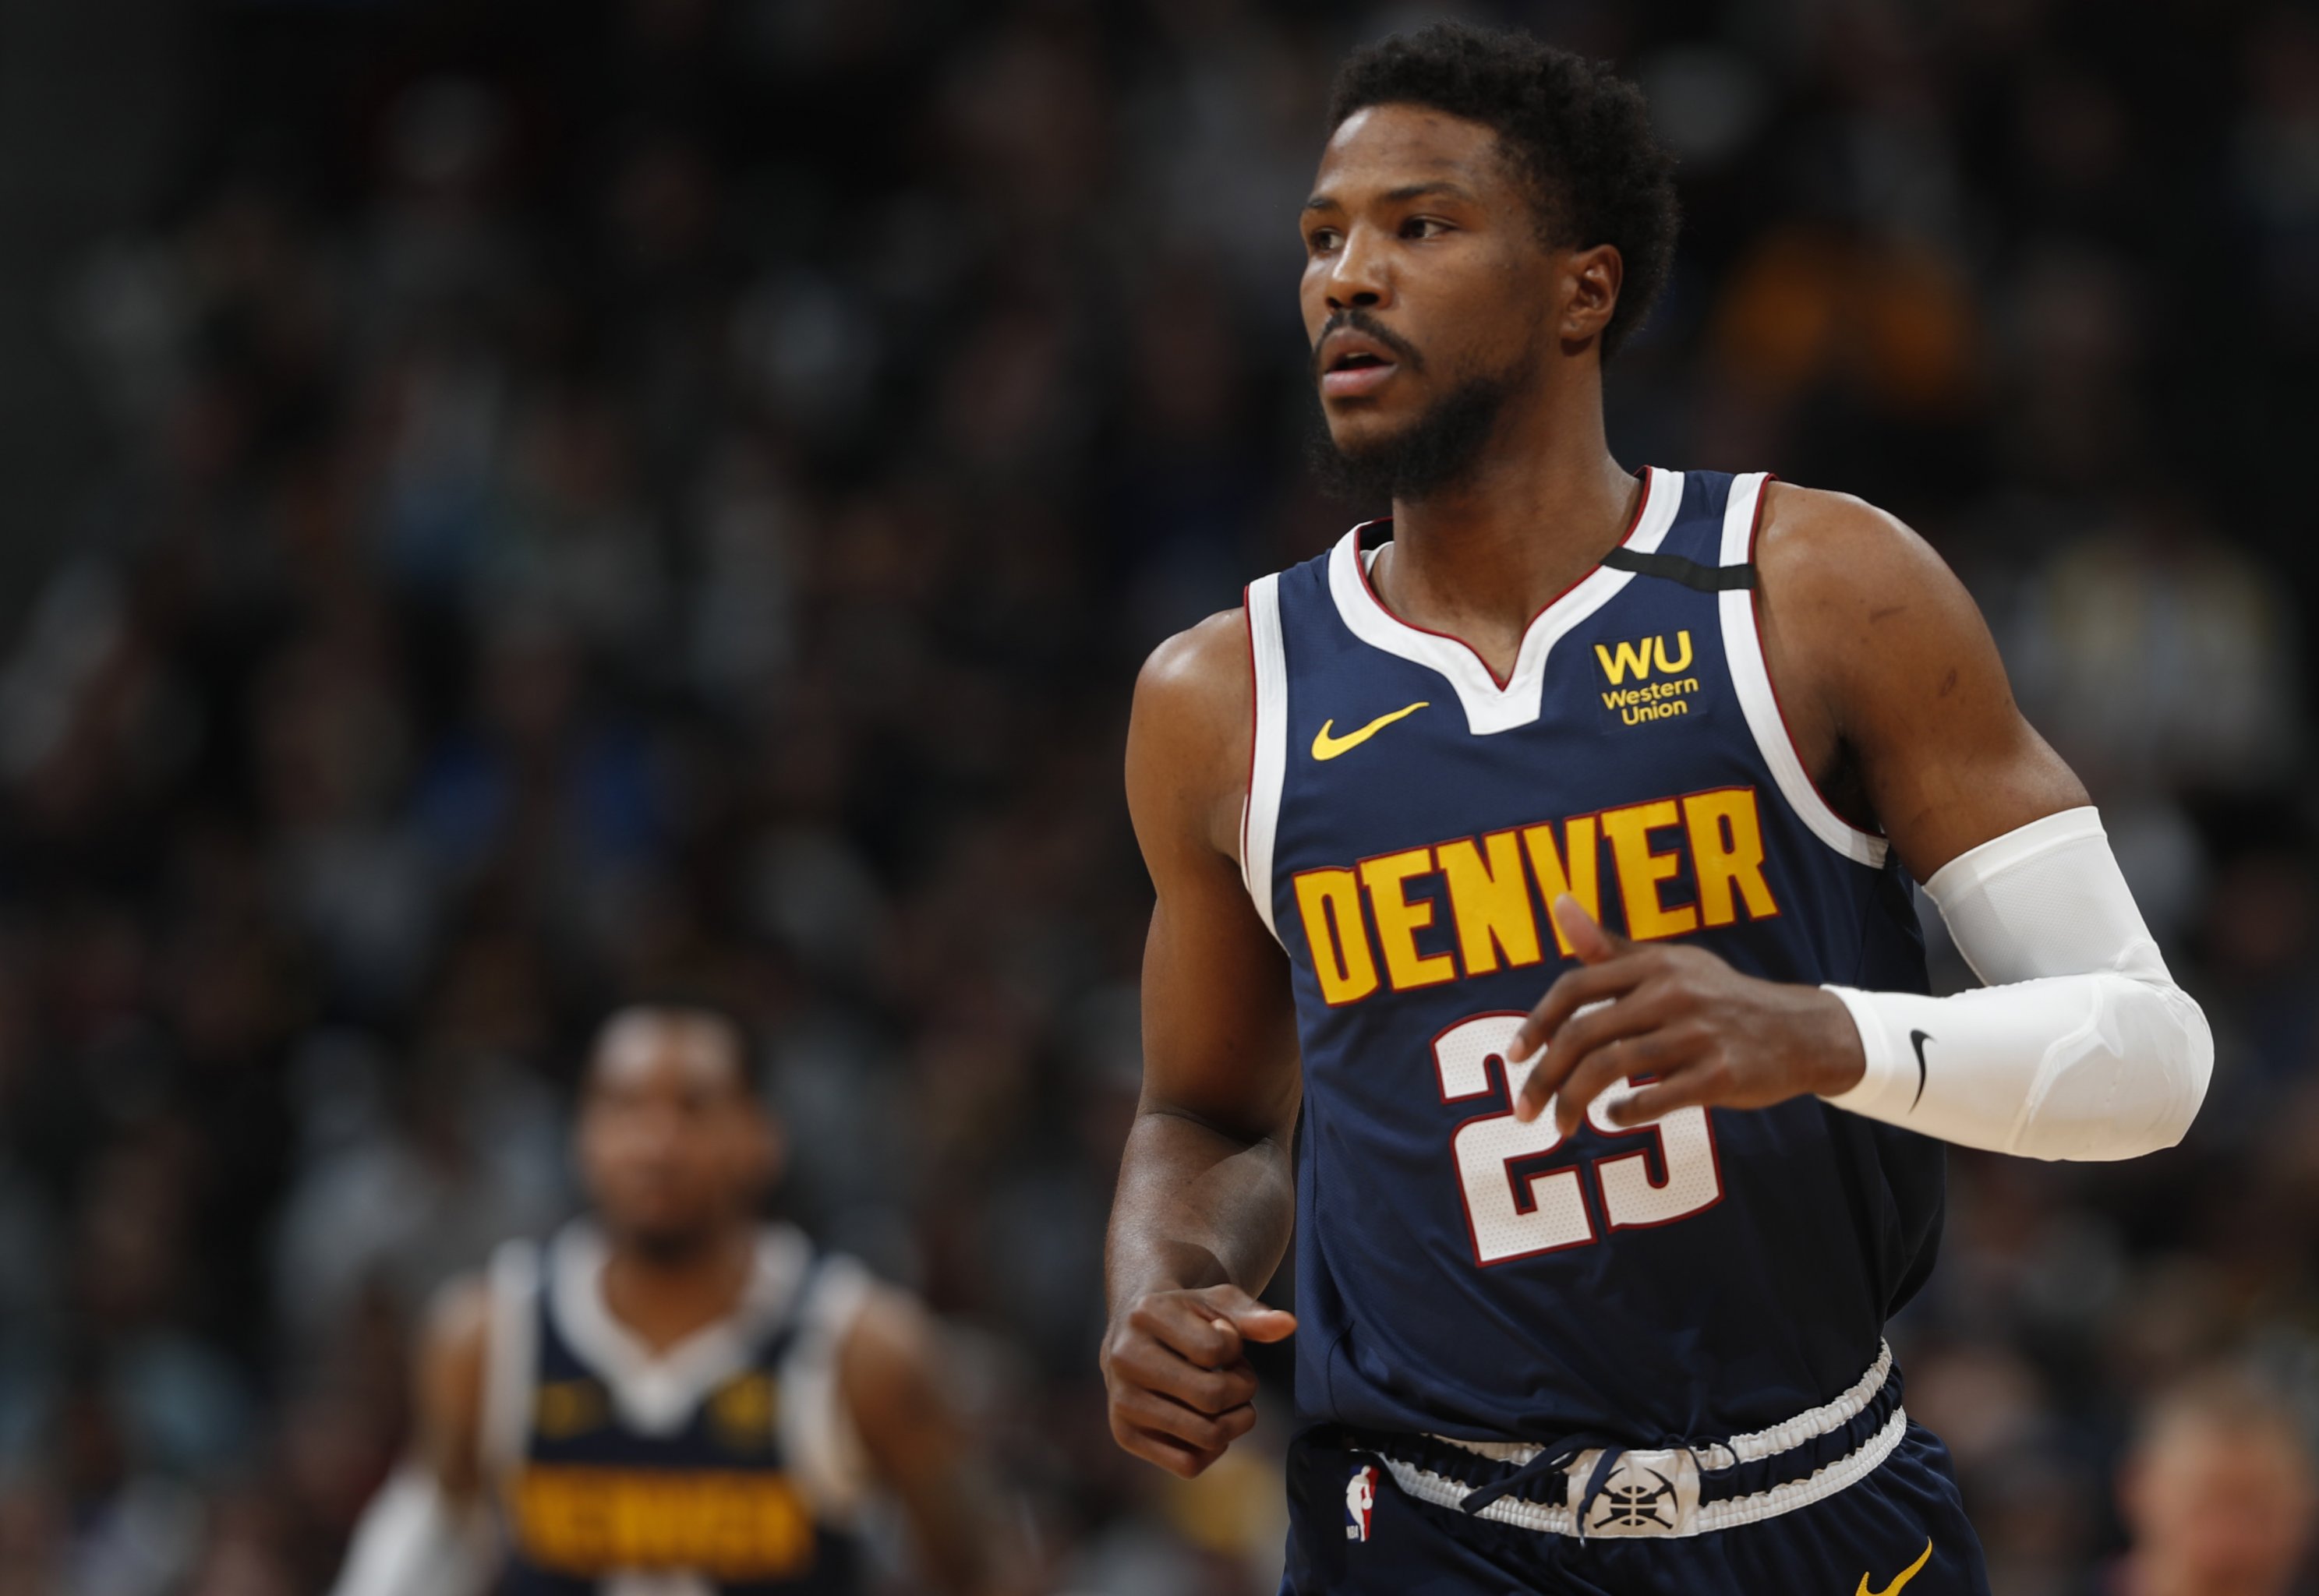 Fantasy Basketball: Trades and waiver wire pickups – New York